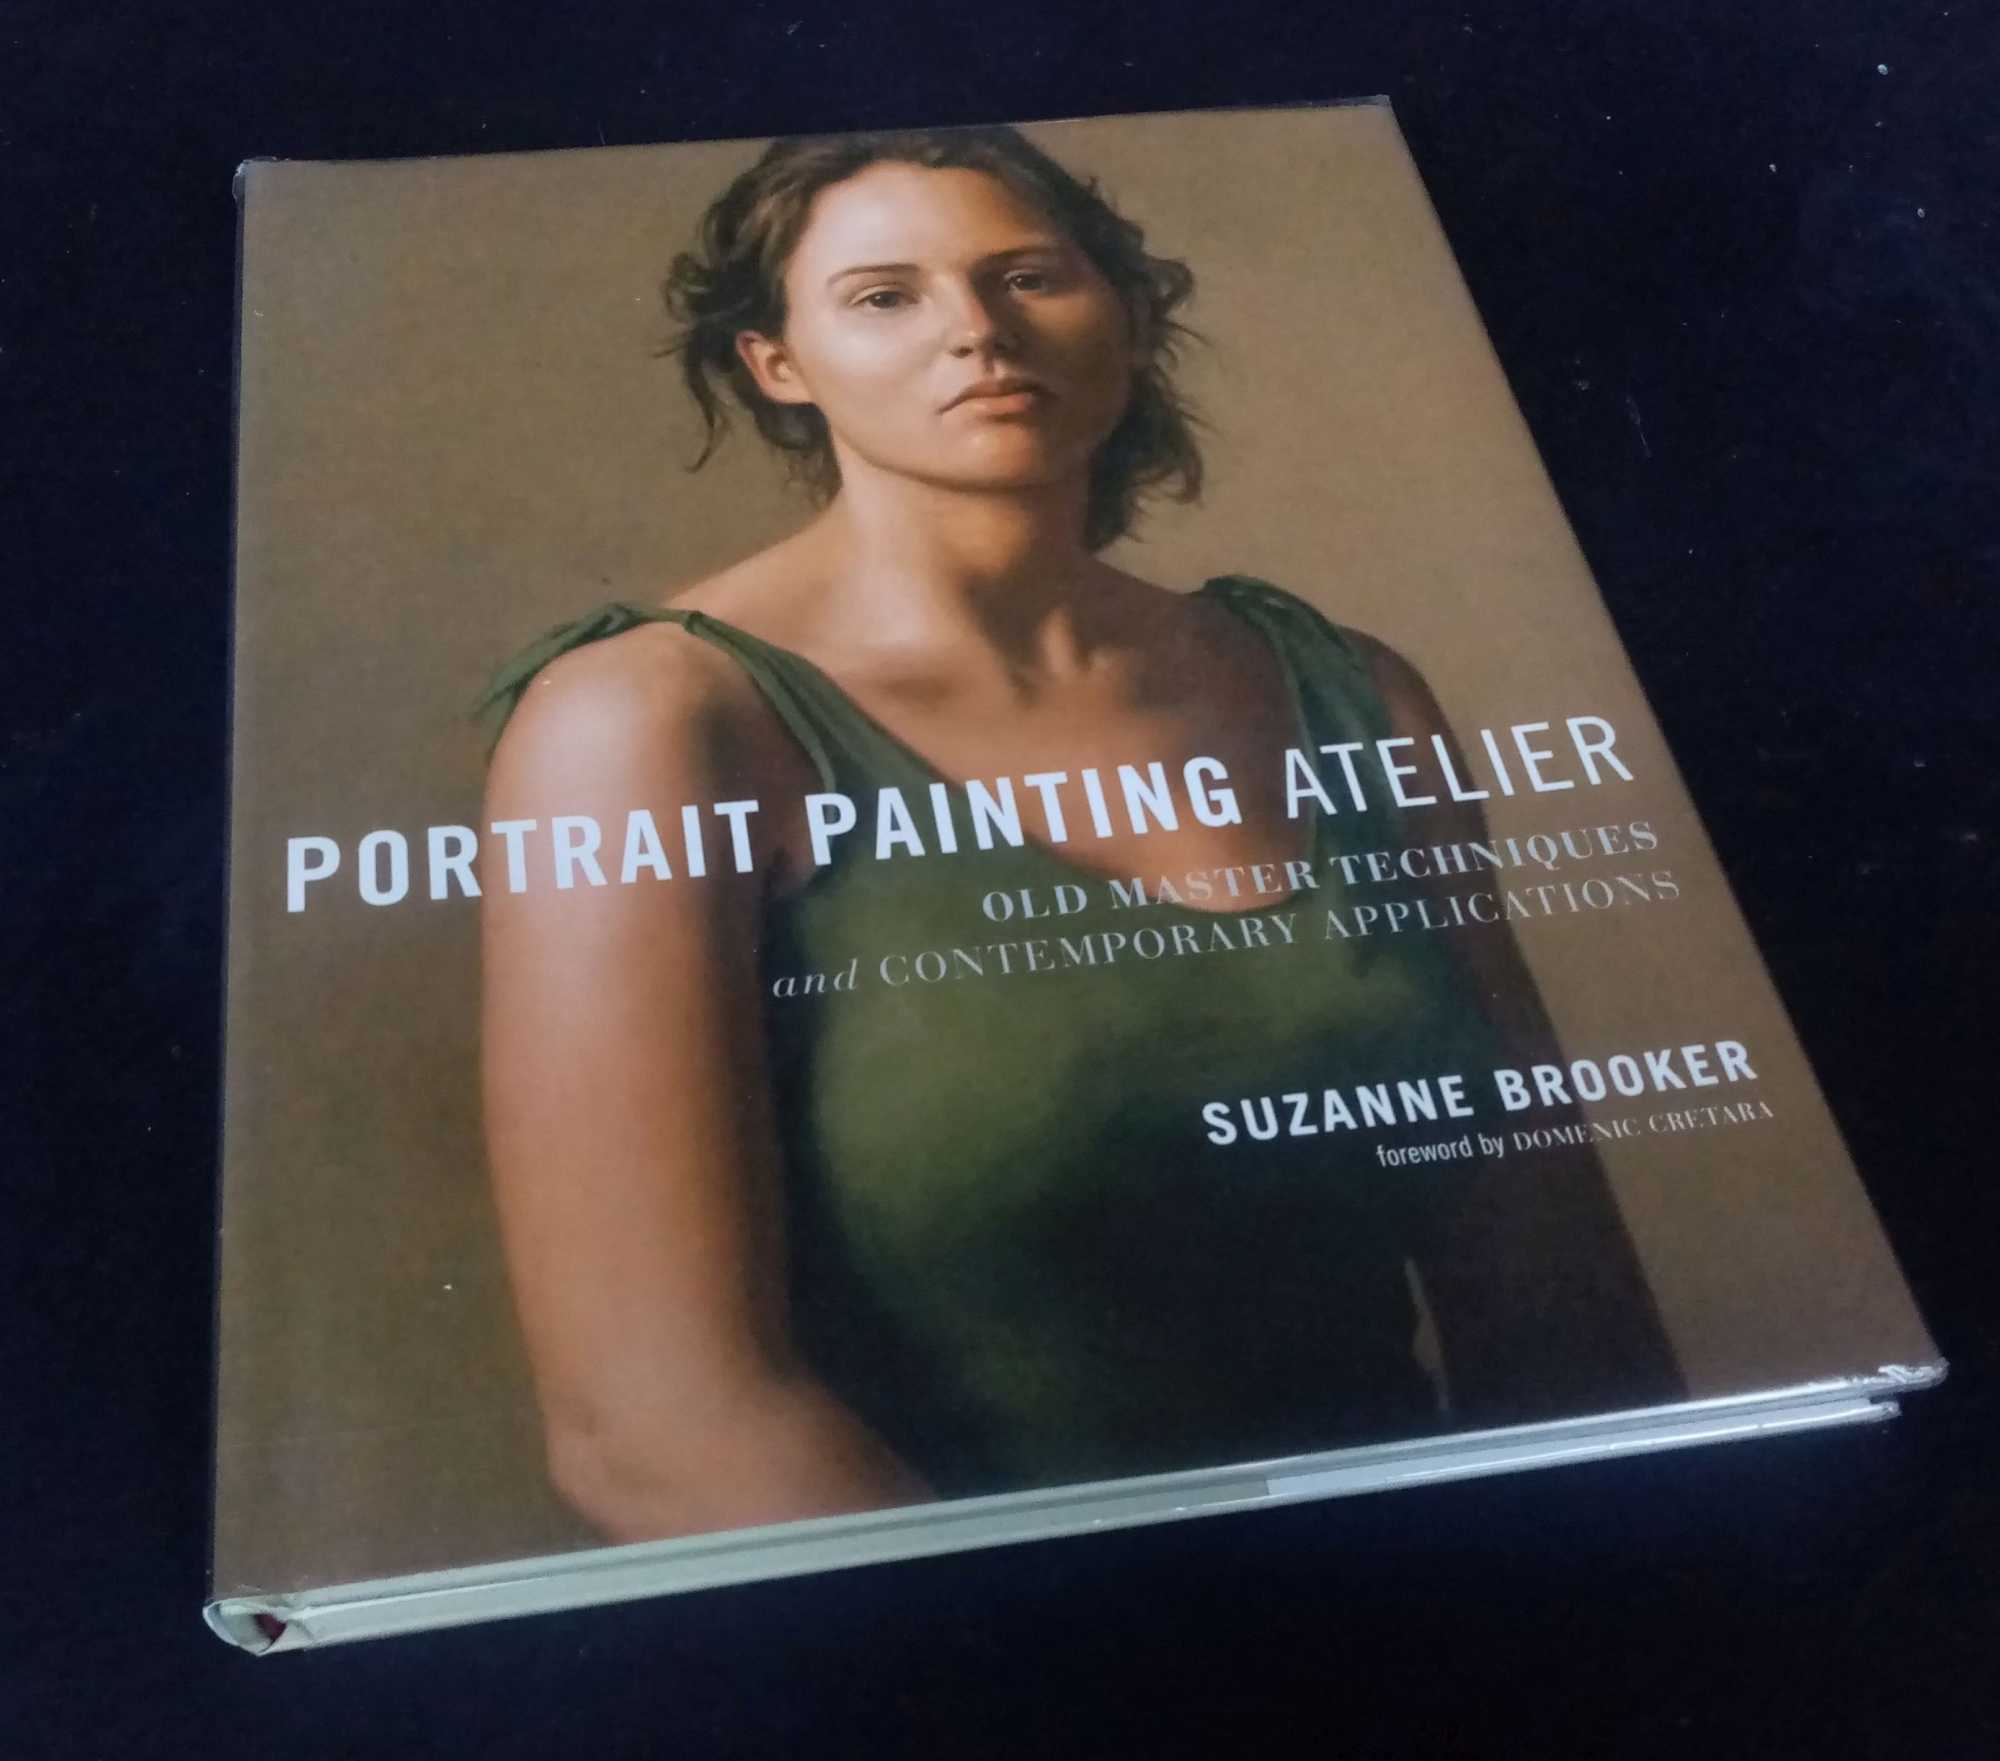 Suzanne Brooker - Portrait Painting Atelier: Old Master Techniques and Contemporary Applications